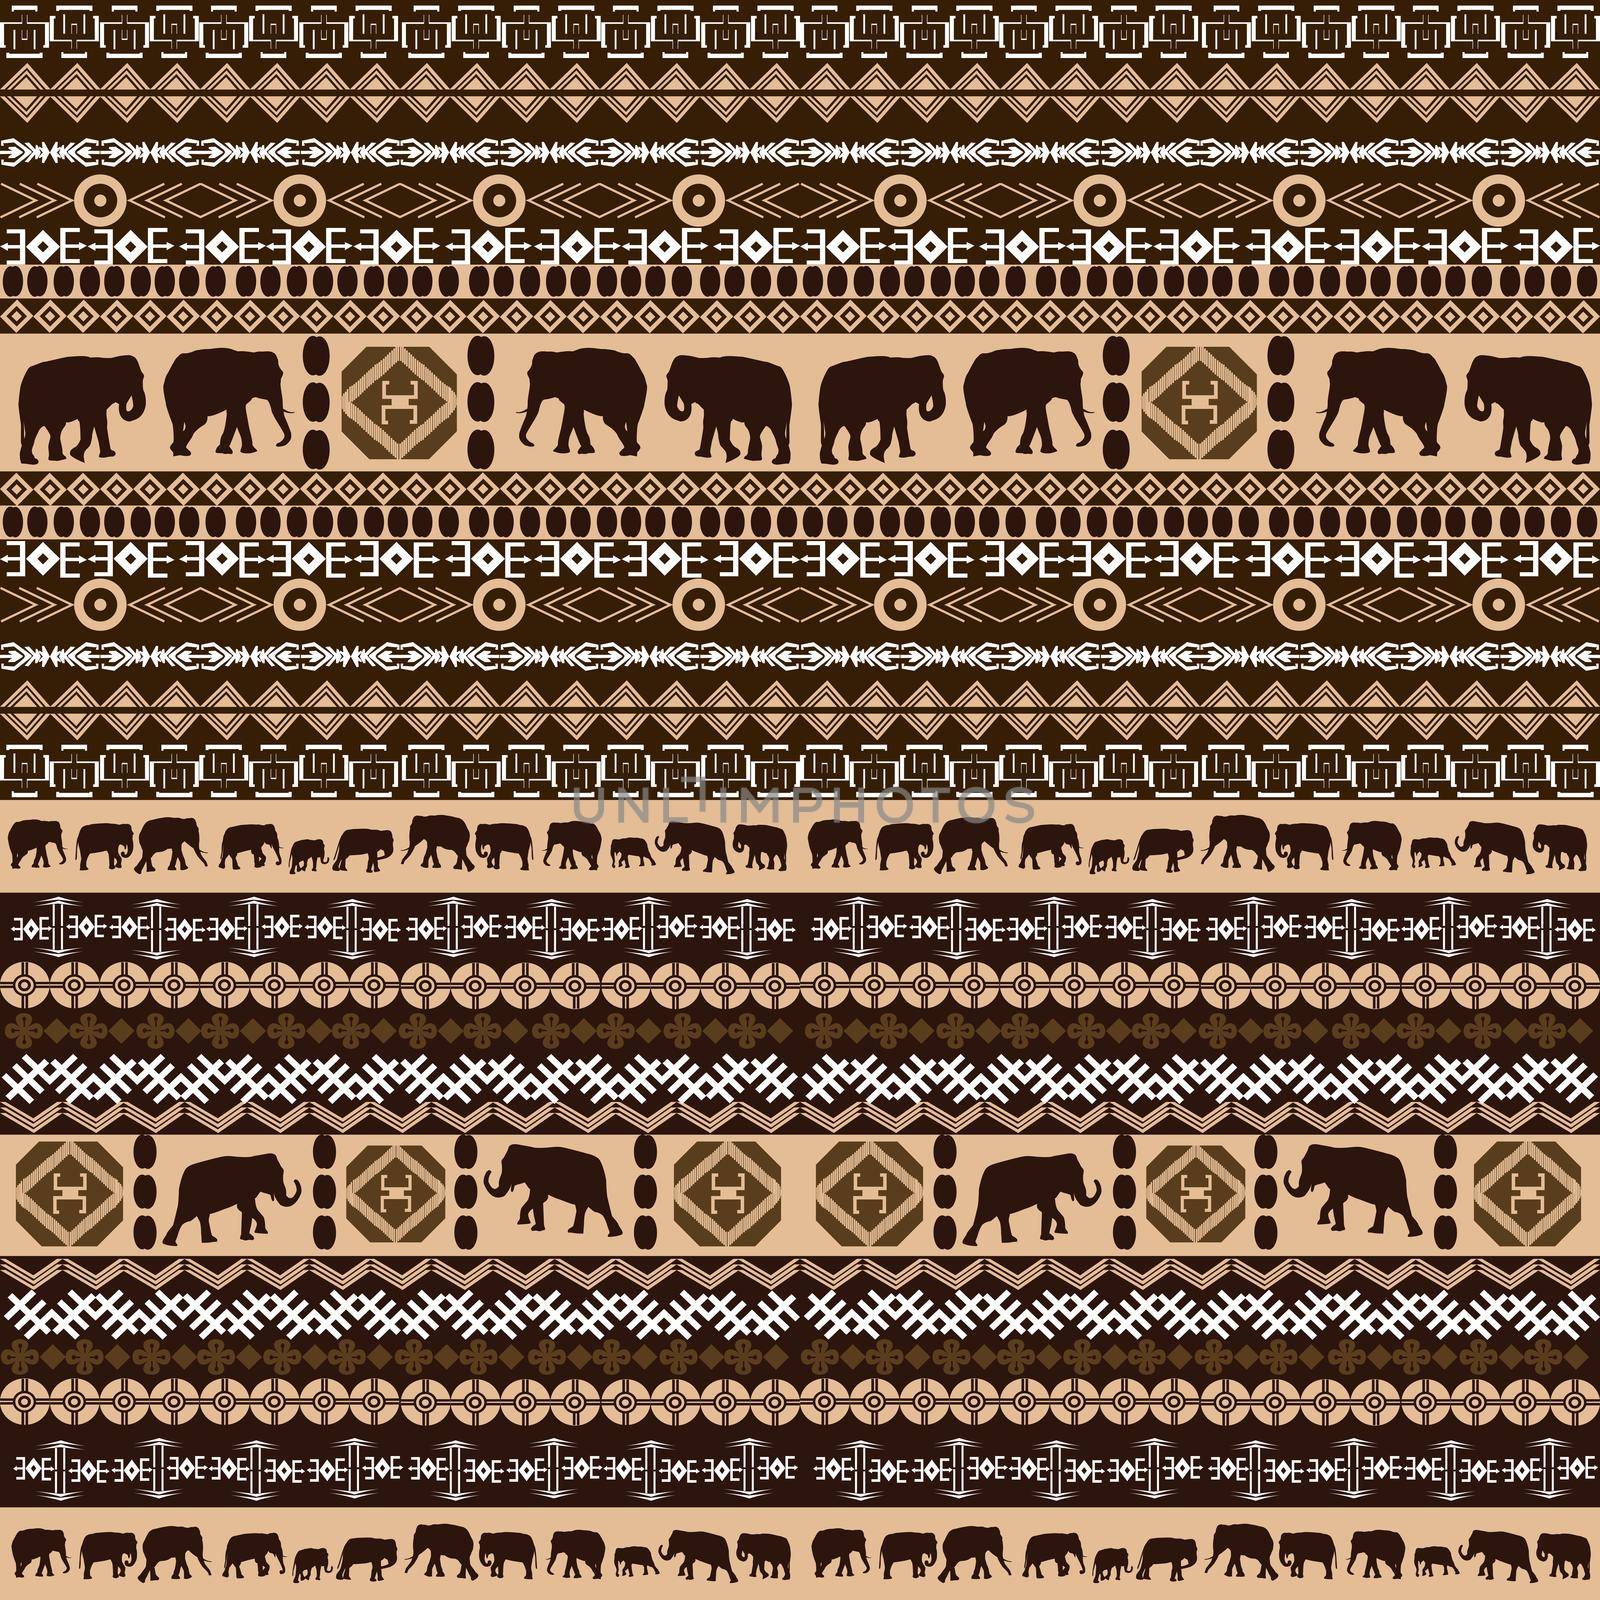 African symbols and motifs pattern with elephants silhouettes by hibrida13